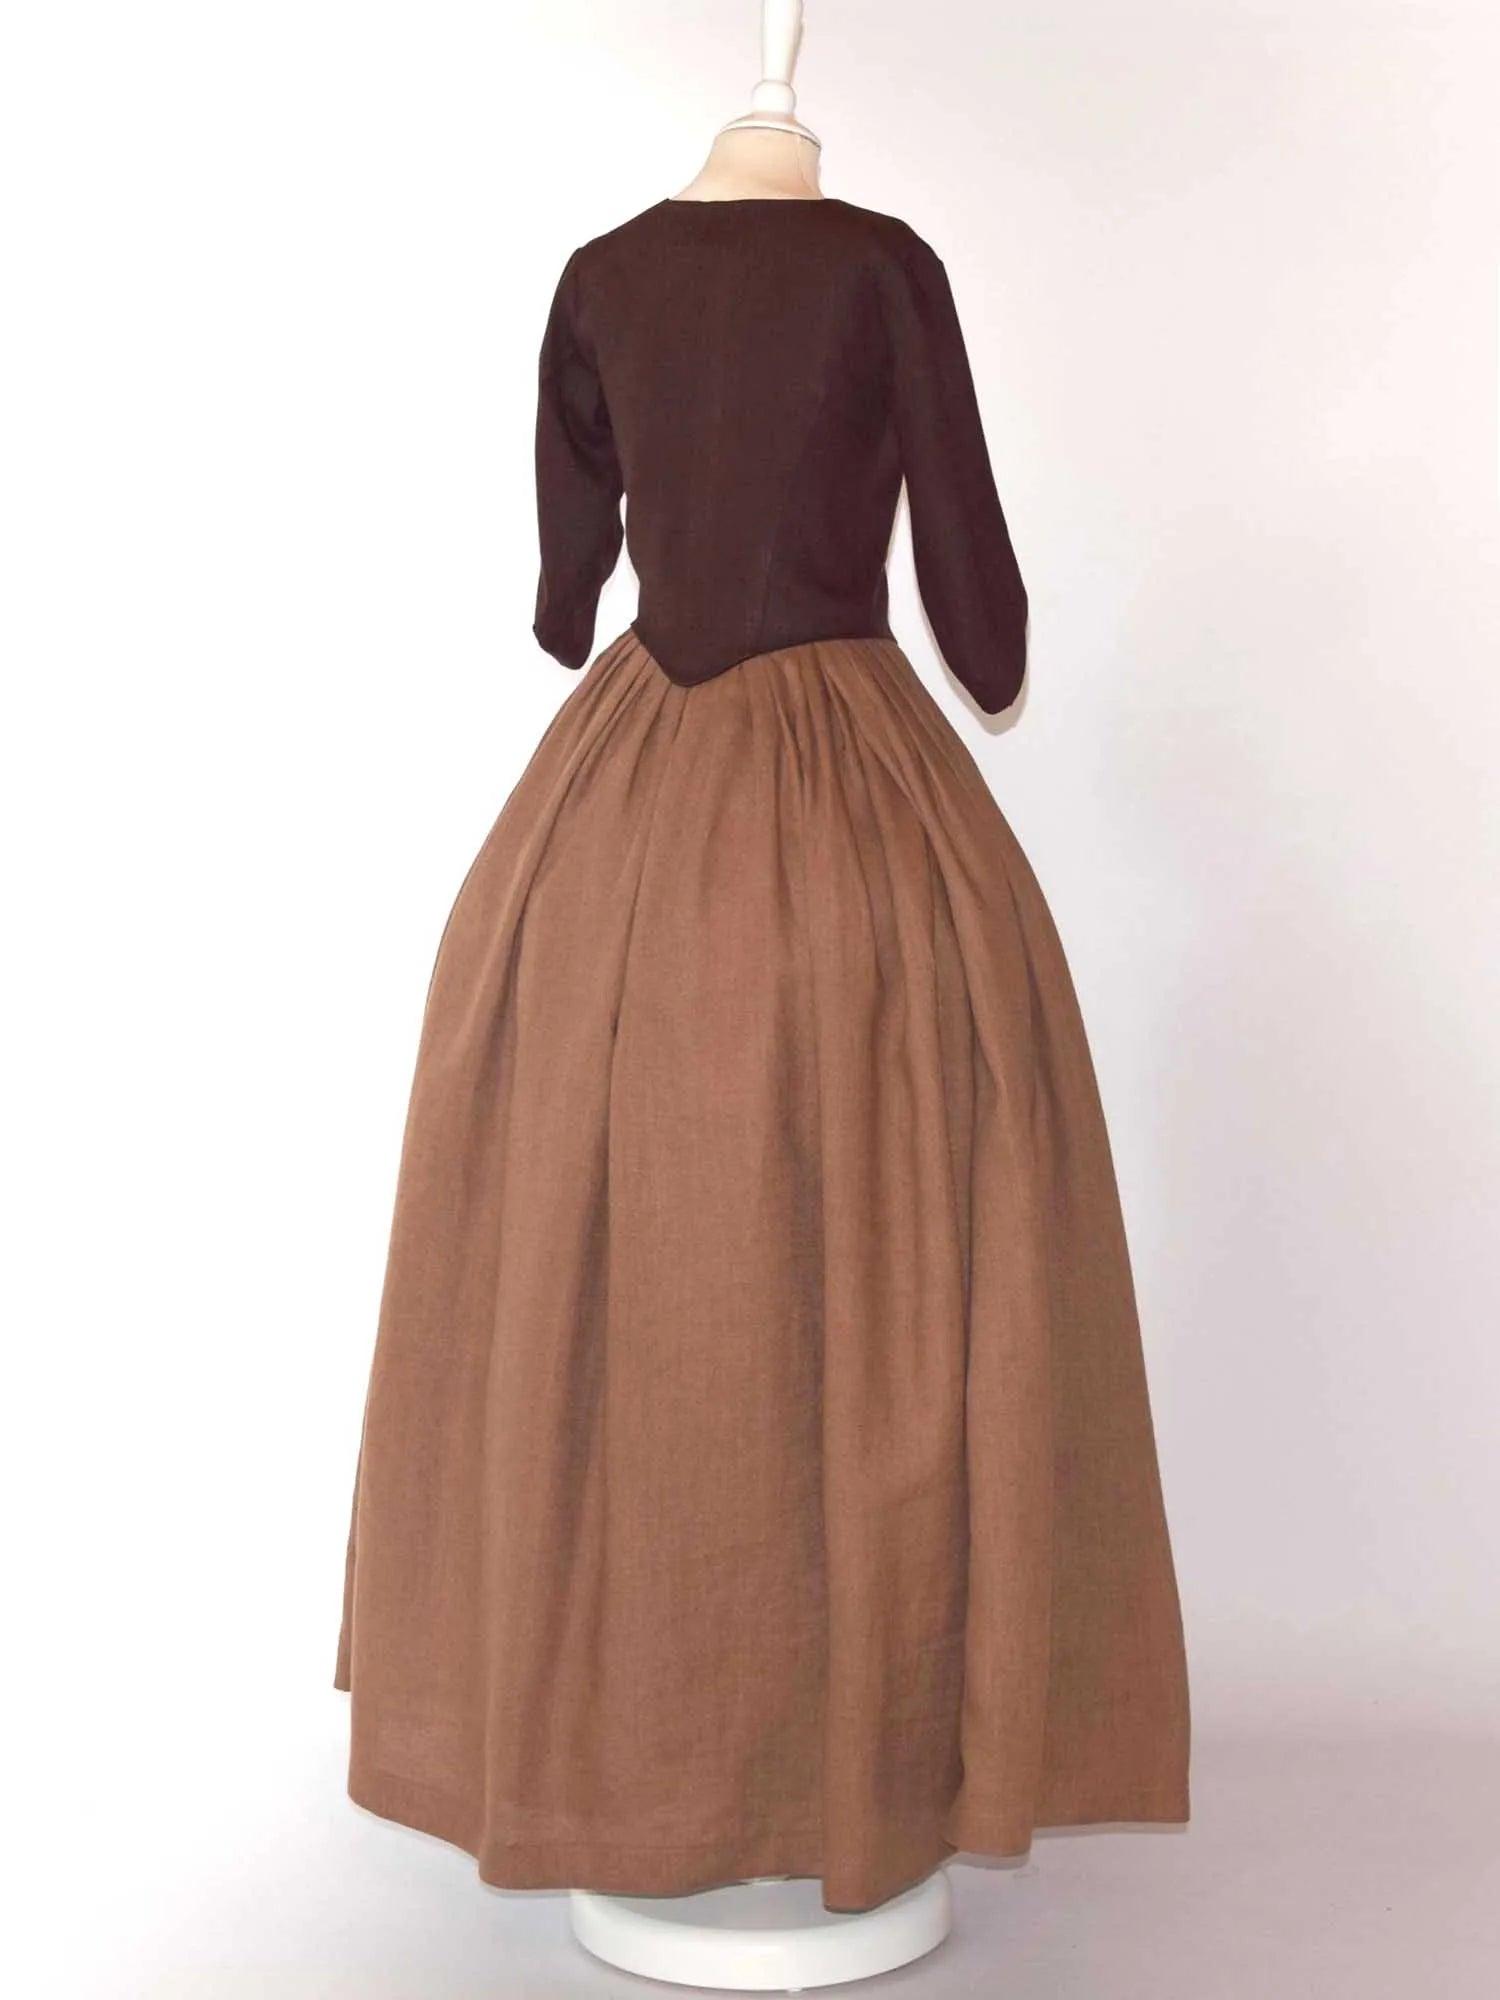 Historical Costume in Chocolate & Toffee Linen - Atelier Serraspina